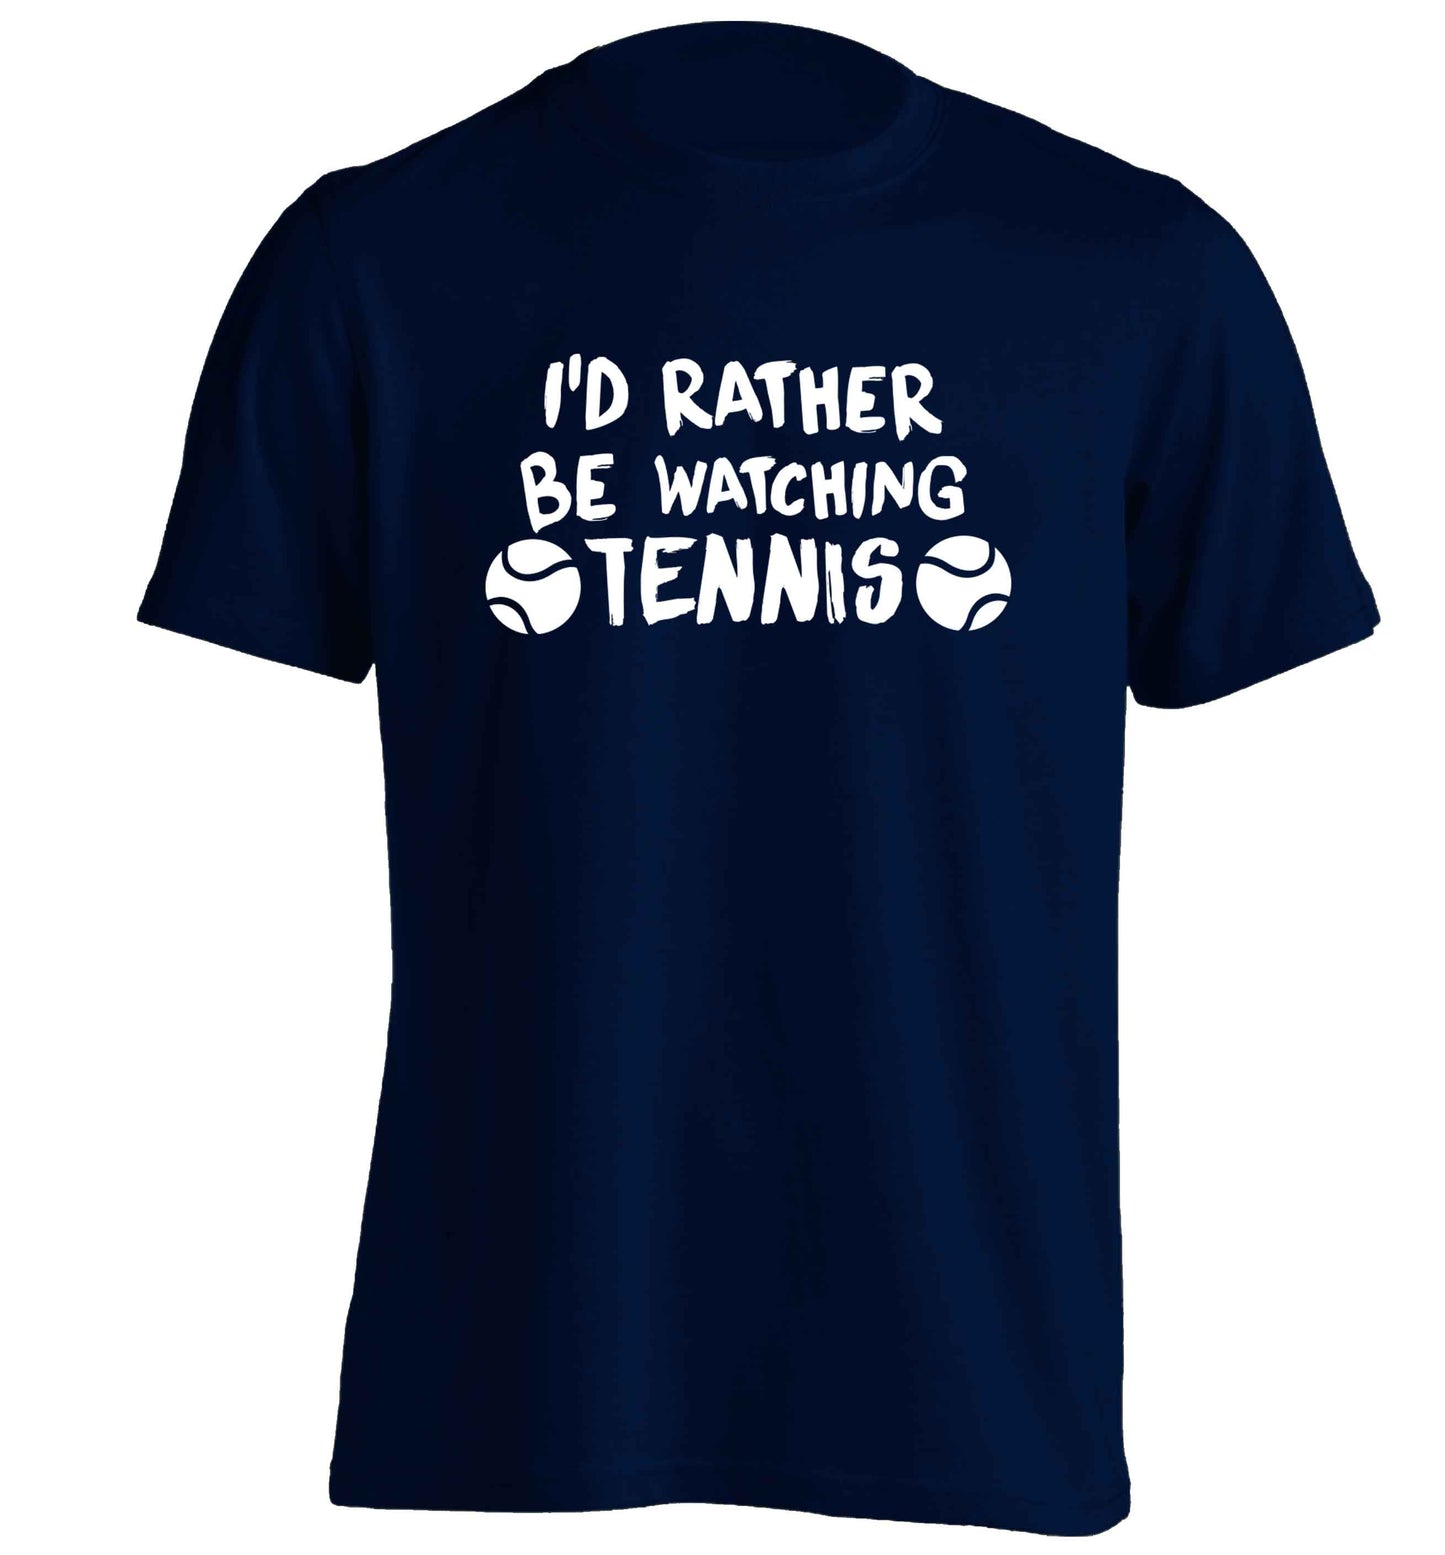 I'd rather be watching the tennis adults unisex navy Tshirt 2XL